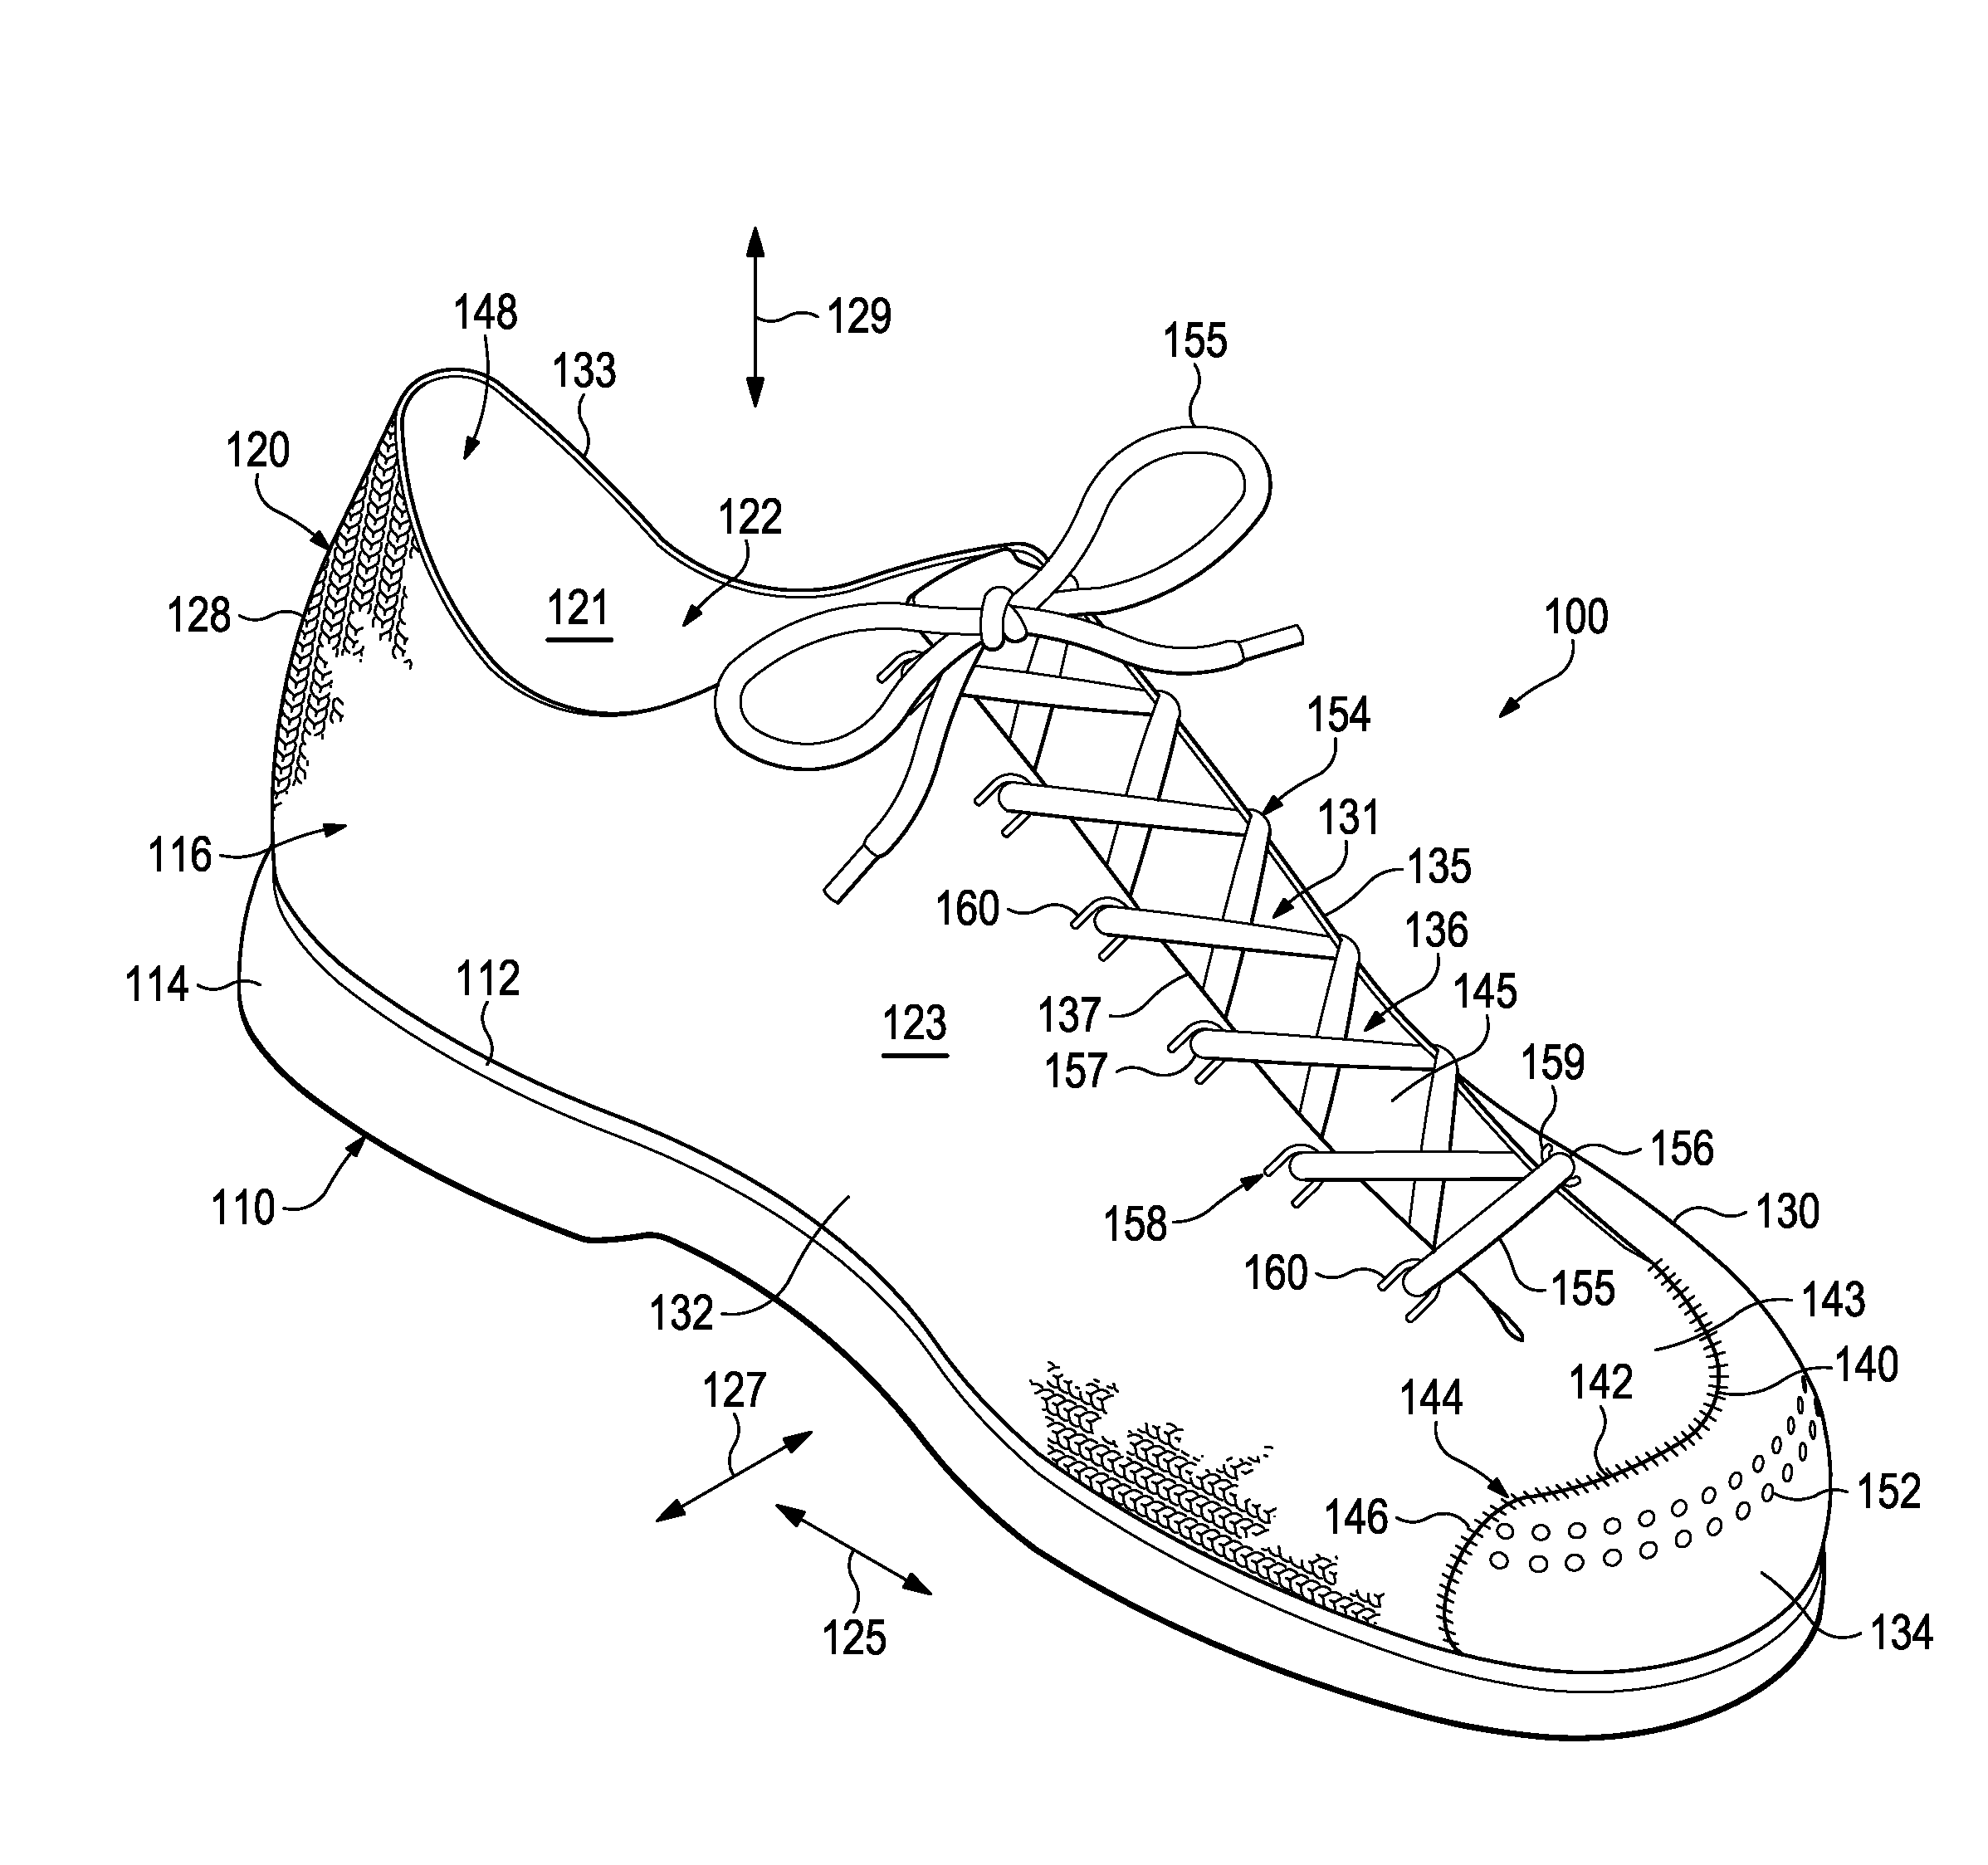 Article Of Footwear Incorporating A Knitted Component With Integrally Knit Contoured Portion